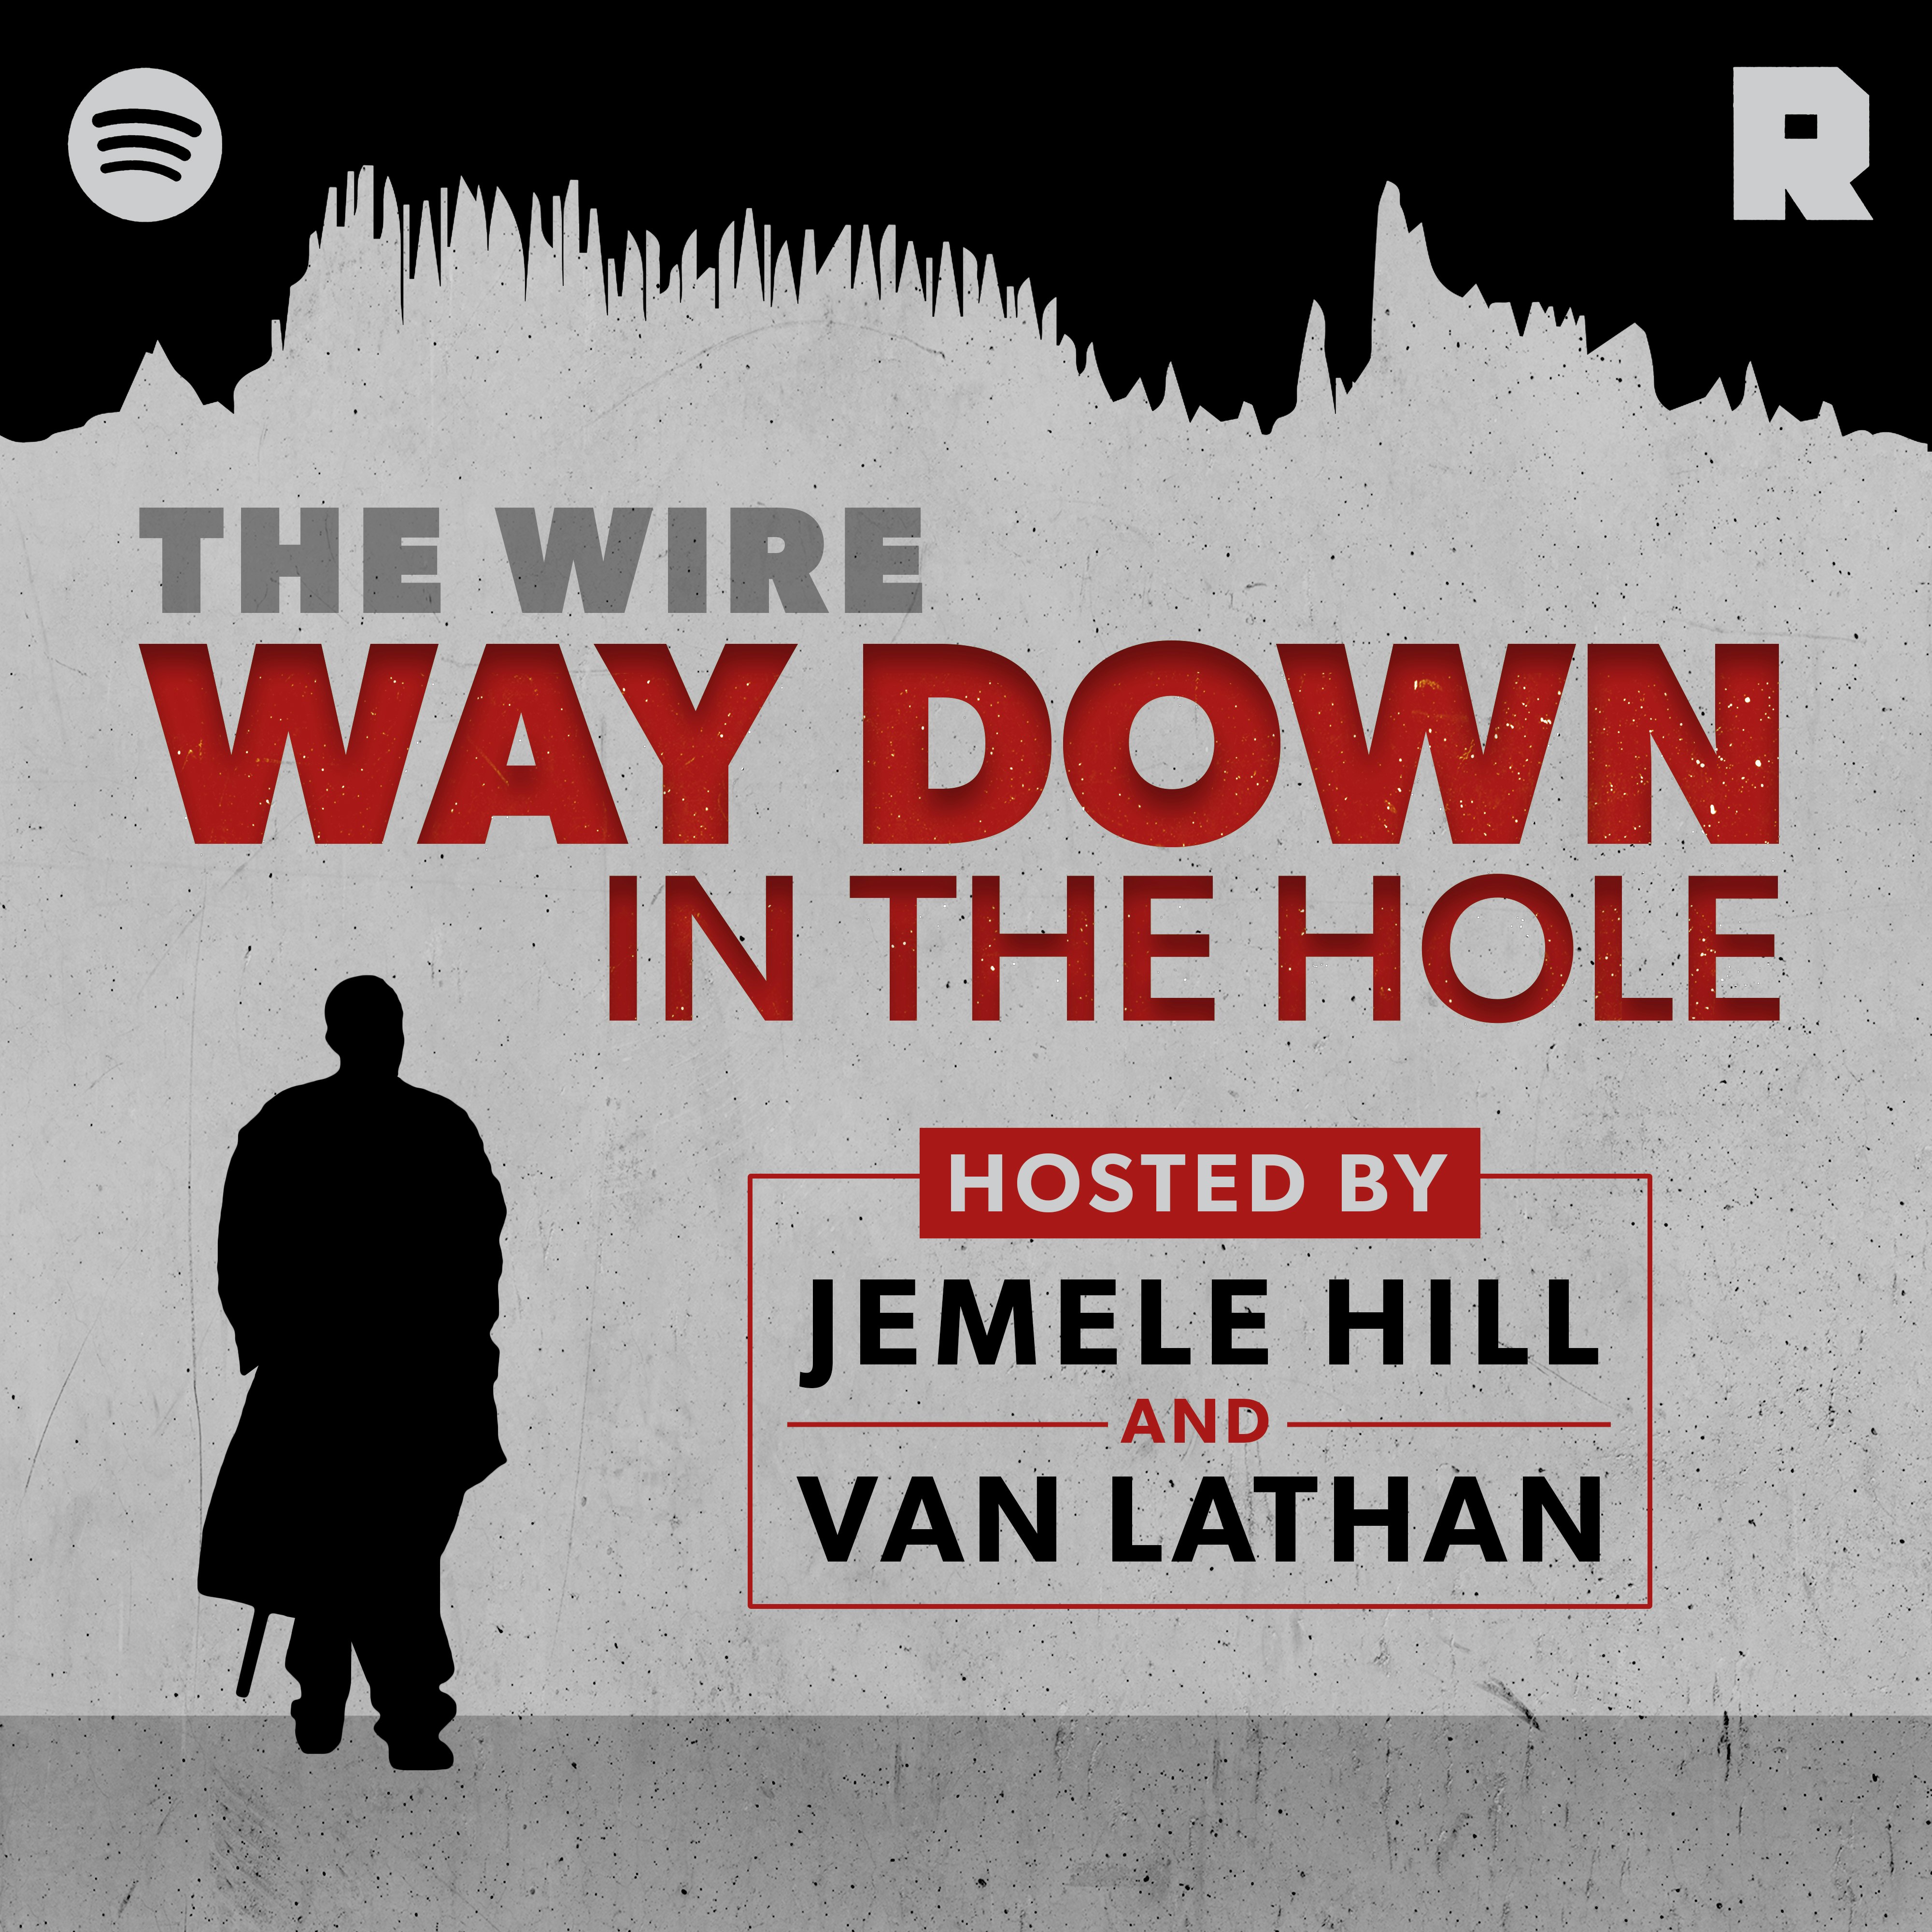 'The Wire': Way Down in the Hole podcast